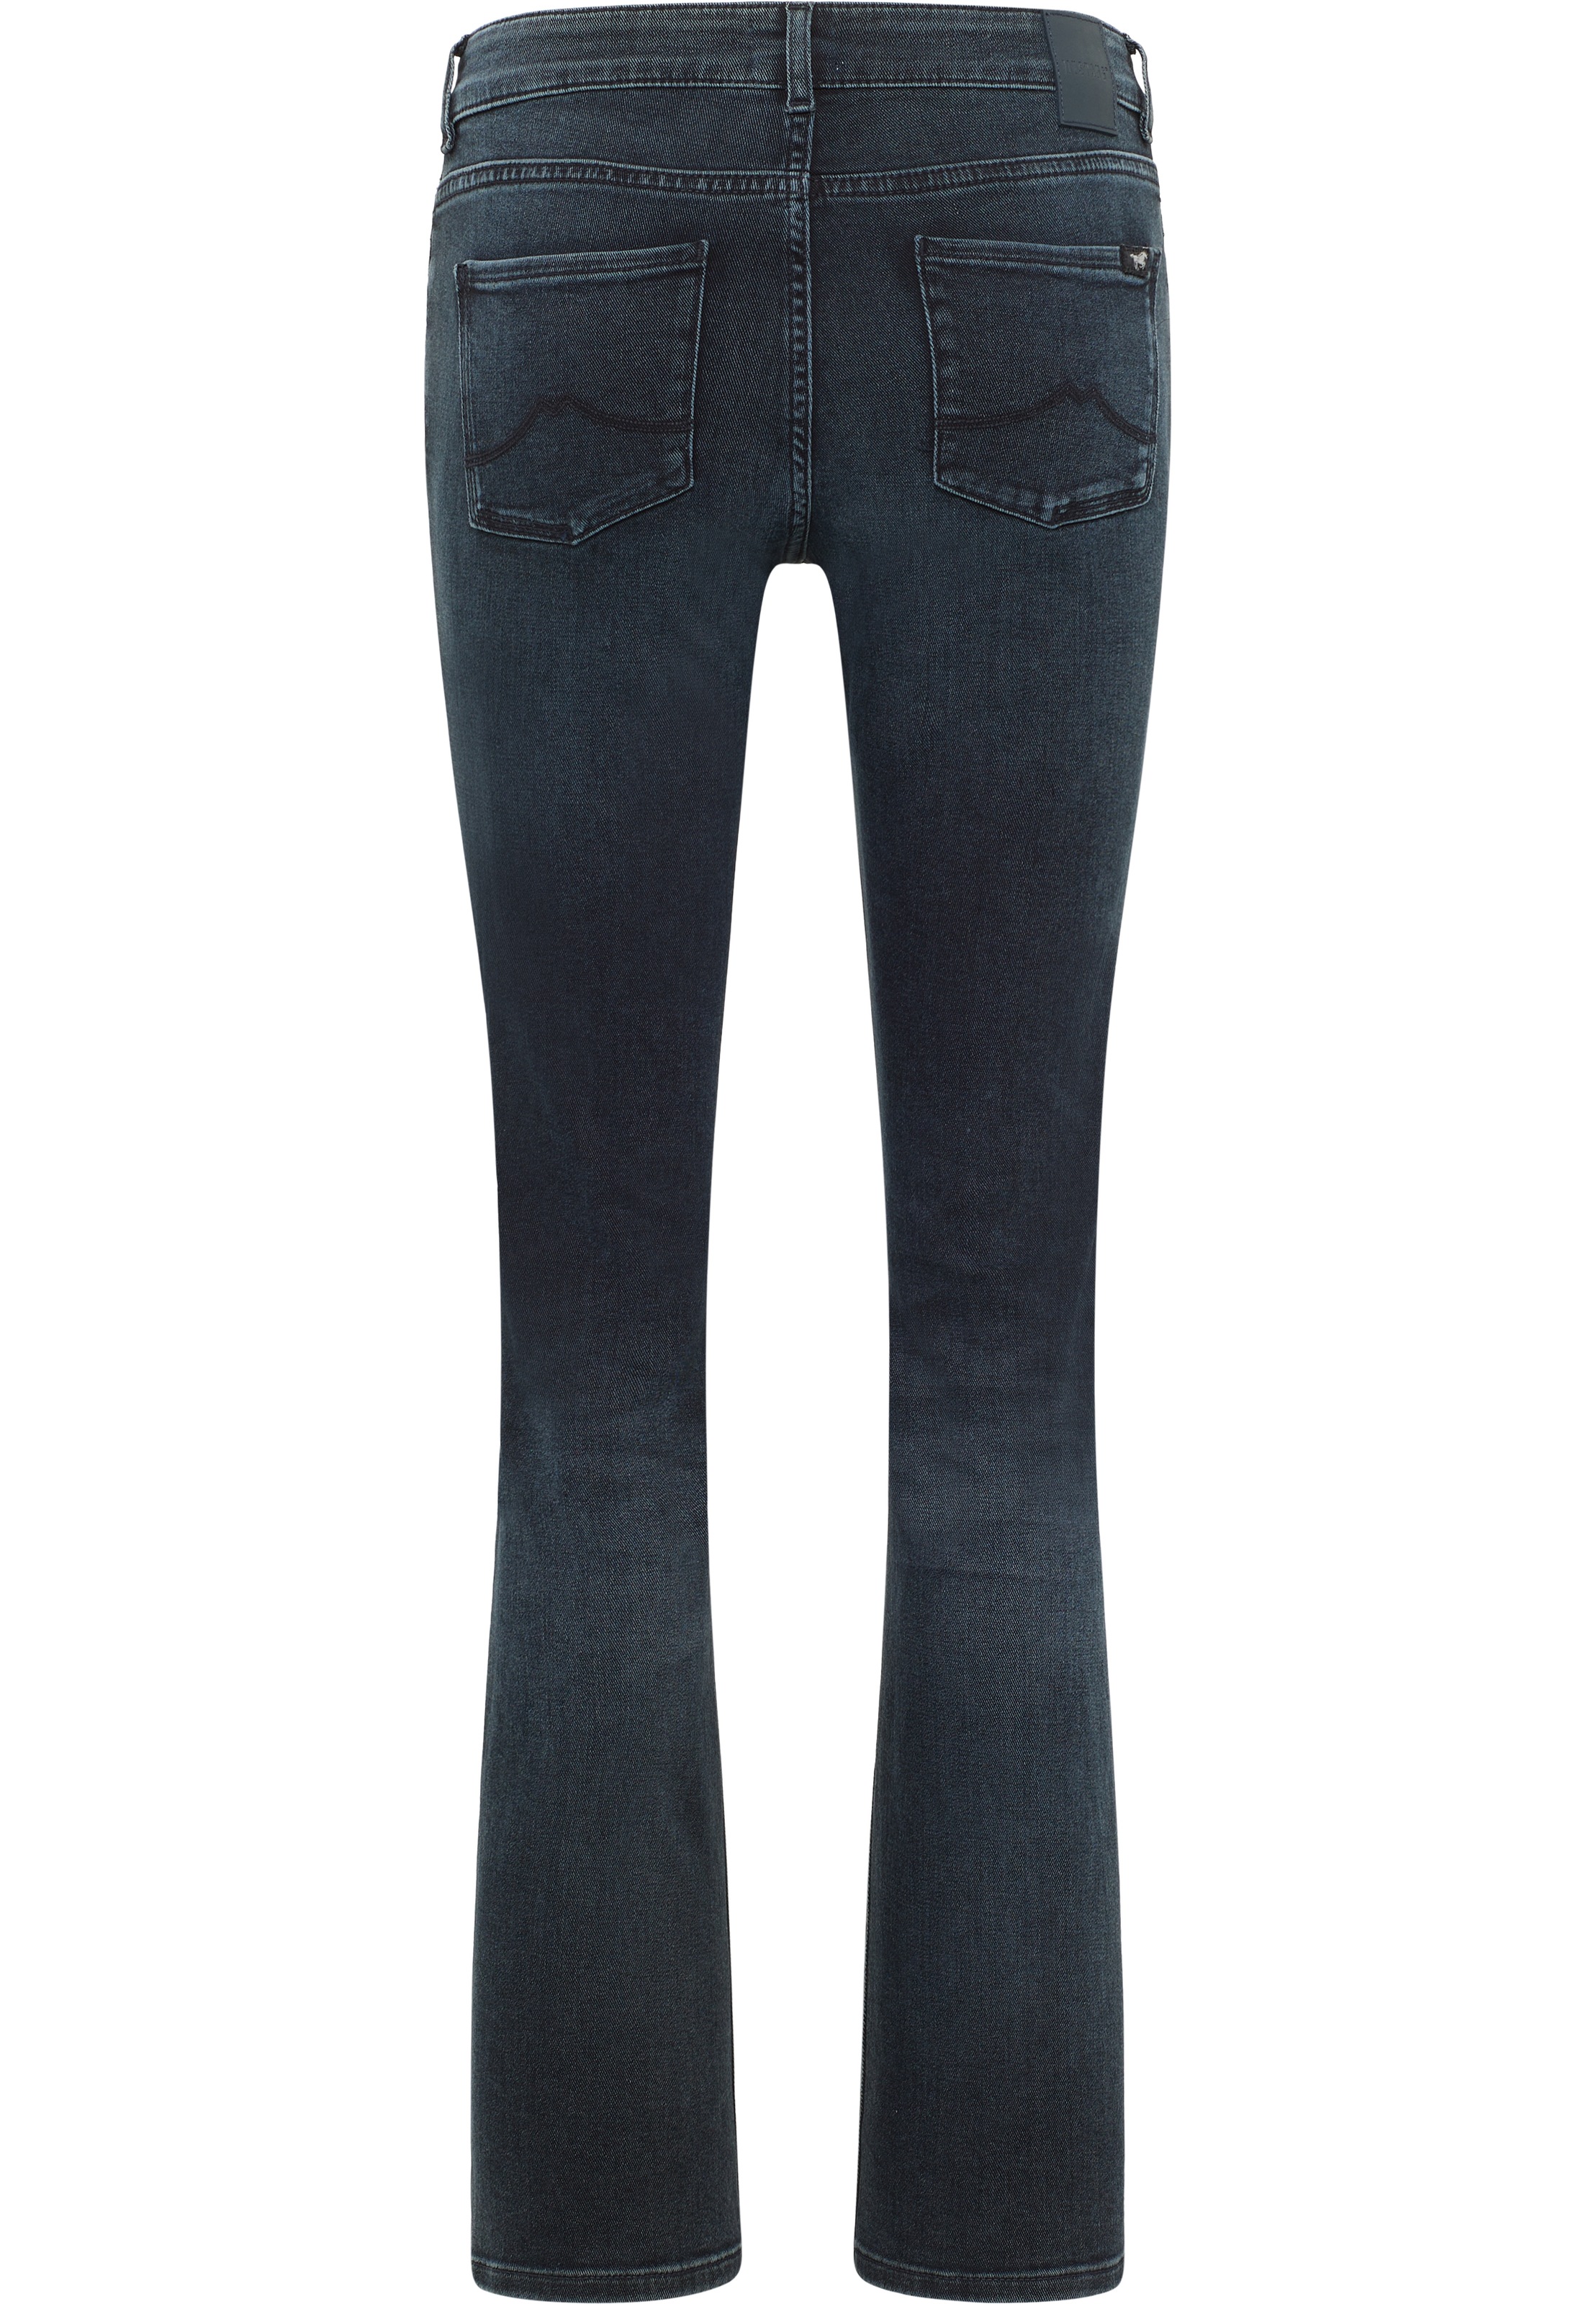 MUSTANG Straight-Jeans »Style Crosby Relaxed im Shop Online Straight« OTTO kaufen